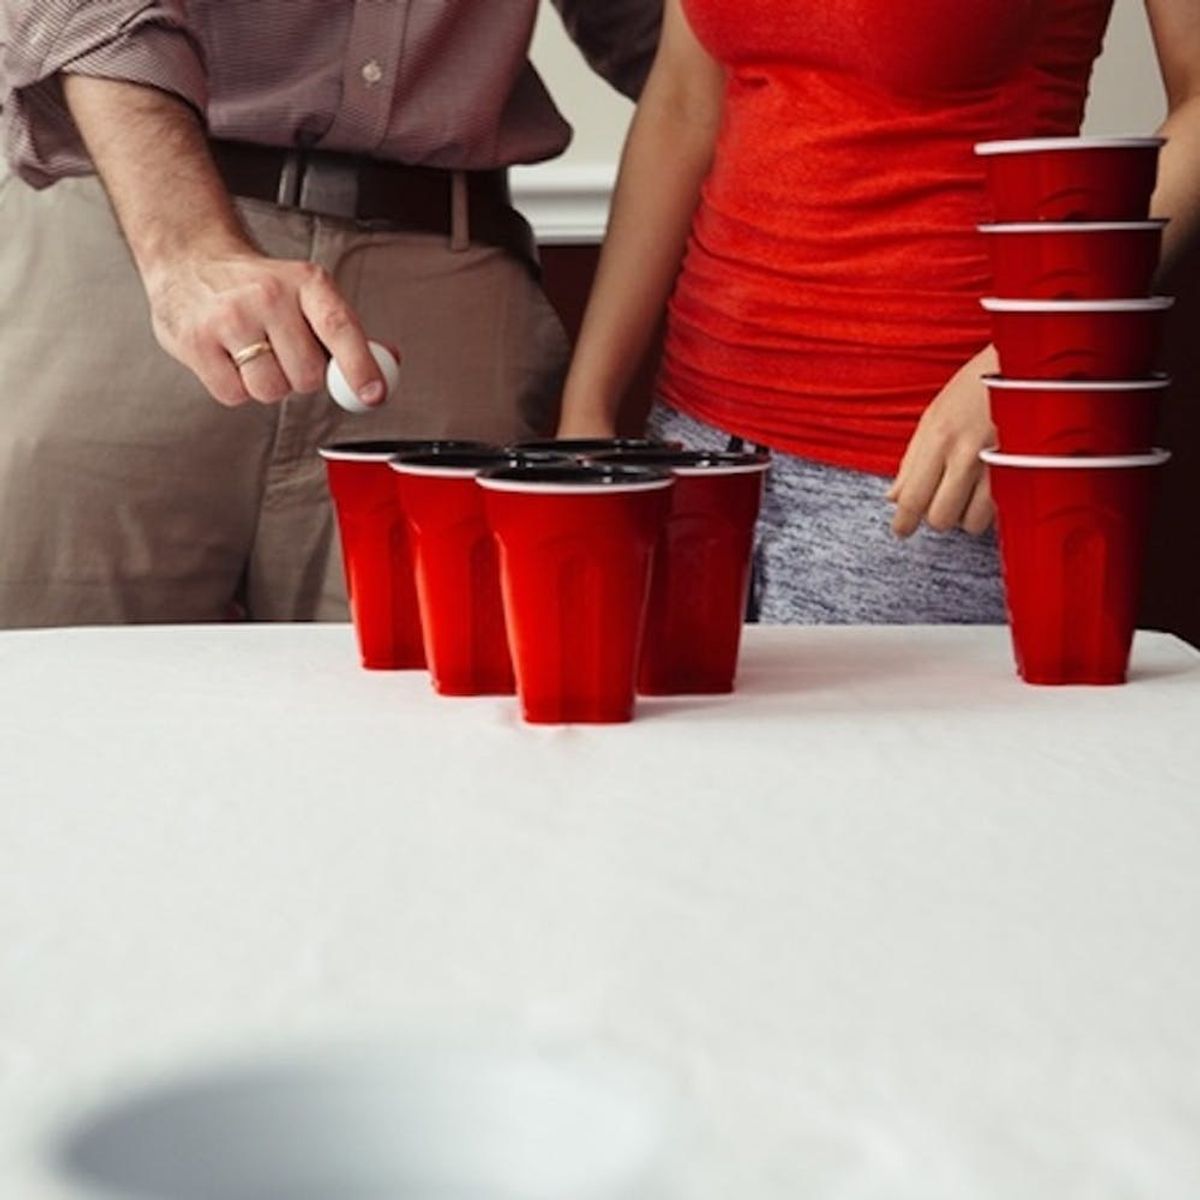 Why Beer Pong Is About to Get Way Less Gross